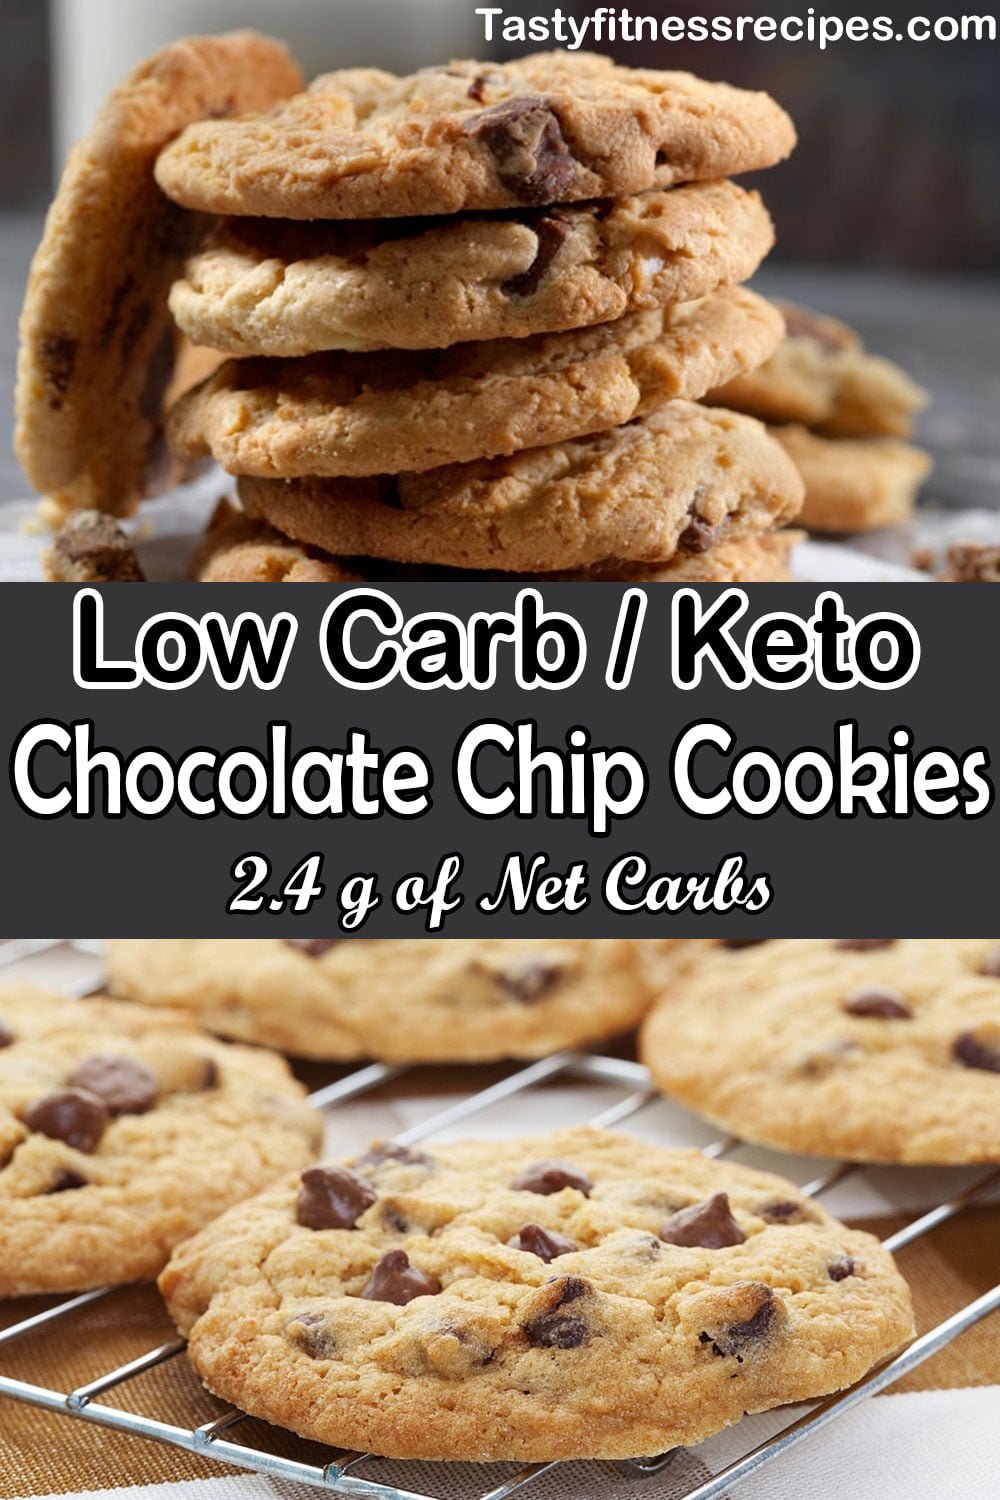 Low Carb keto chocolate chip cookies